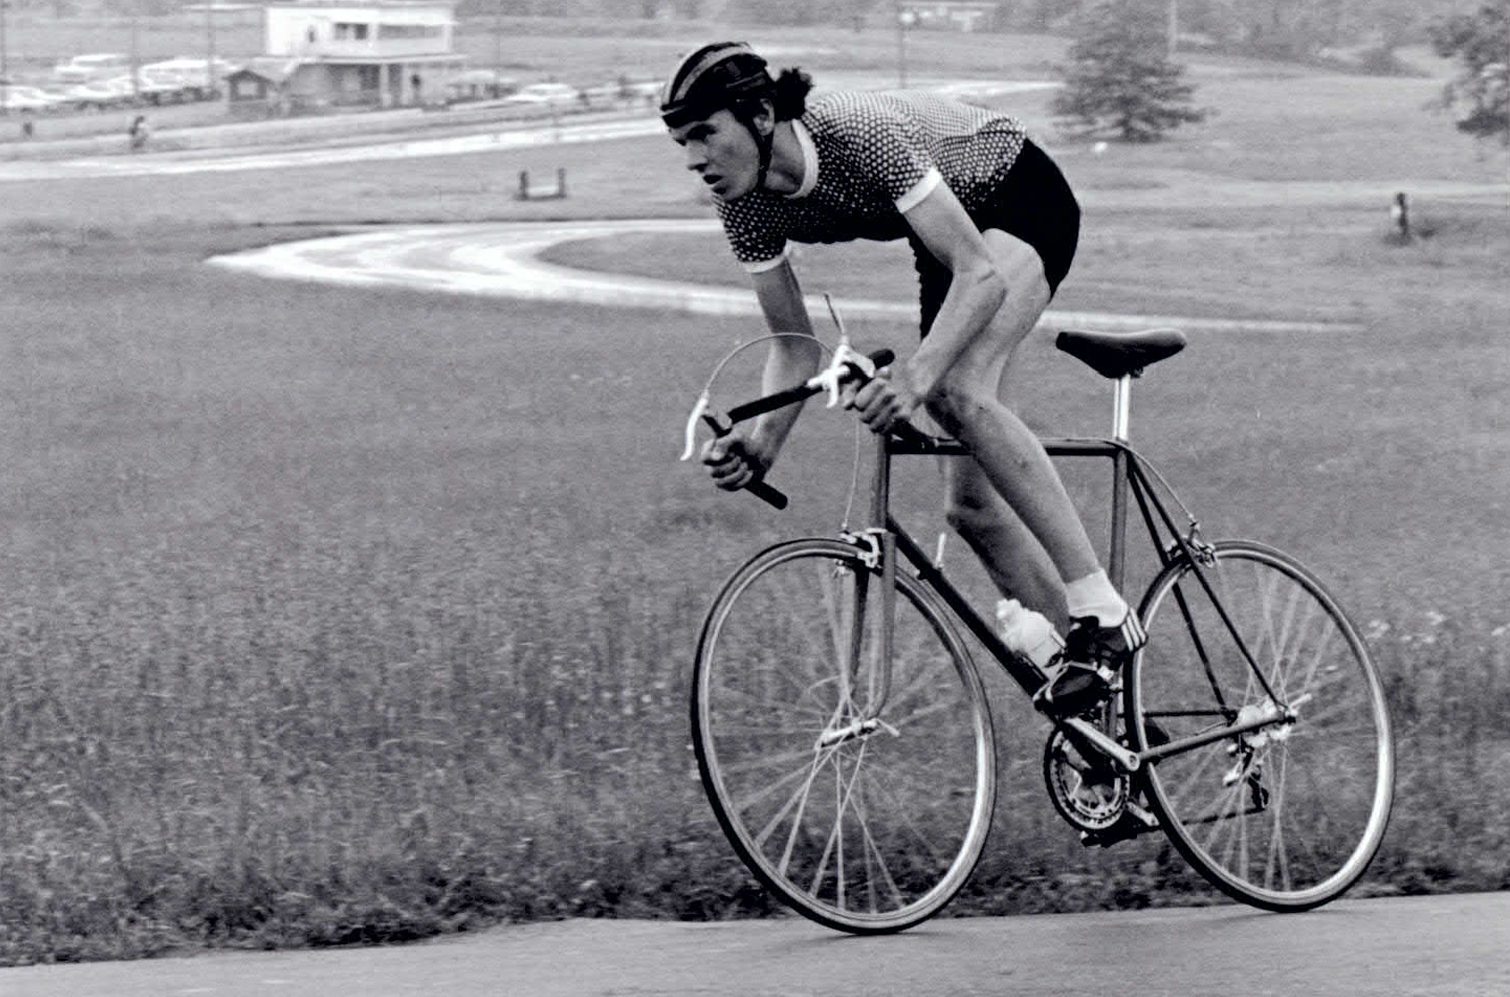 Tom Ritchey riding an old-school road bicycle.